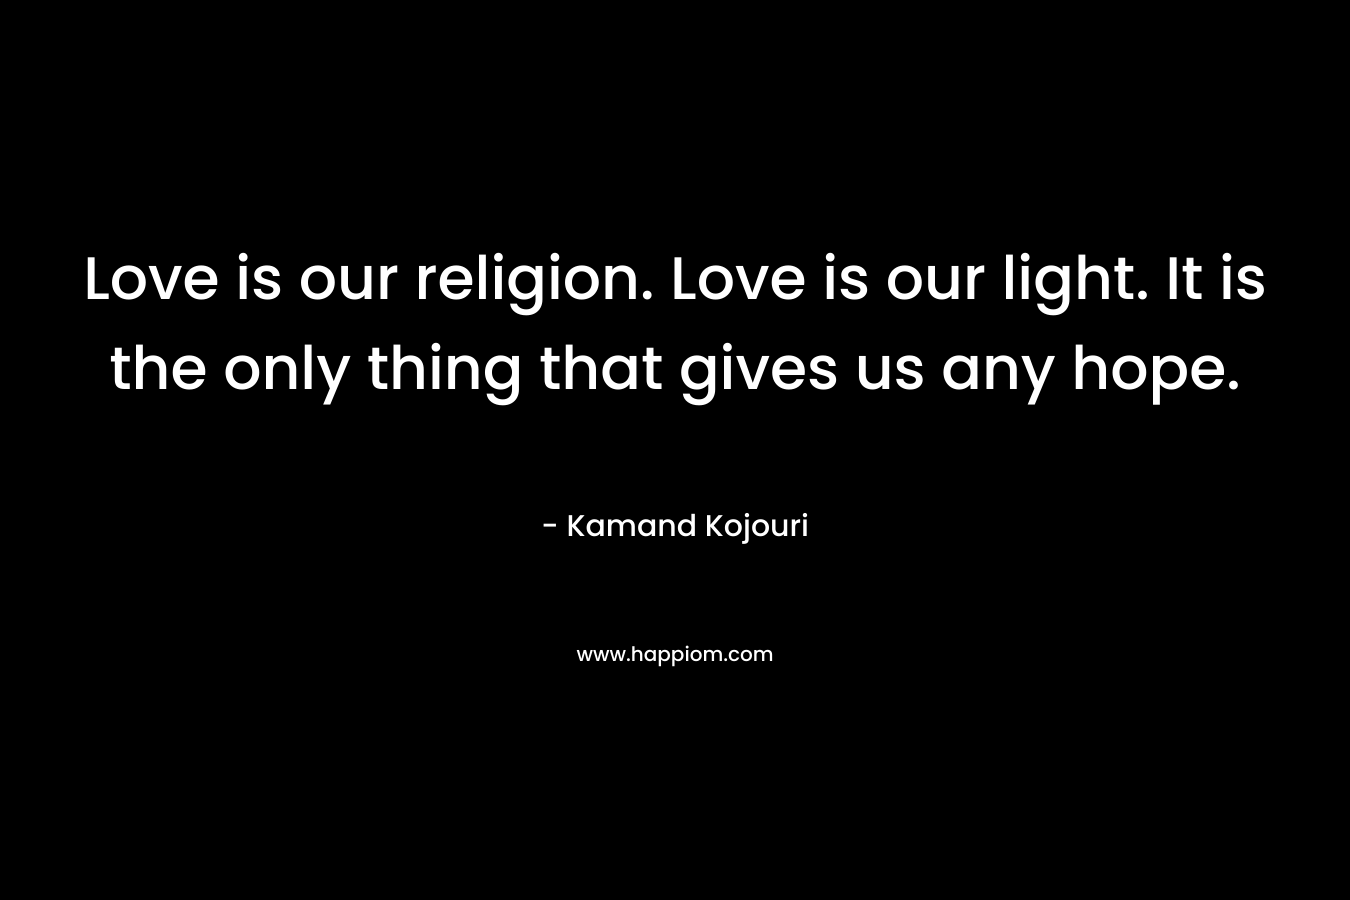 Love is our religion. Love is our light. It is the only thing that gives us any hope.